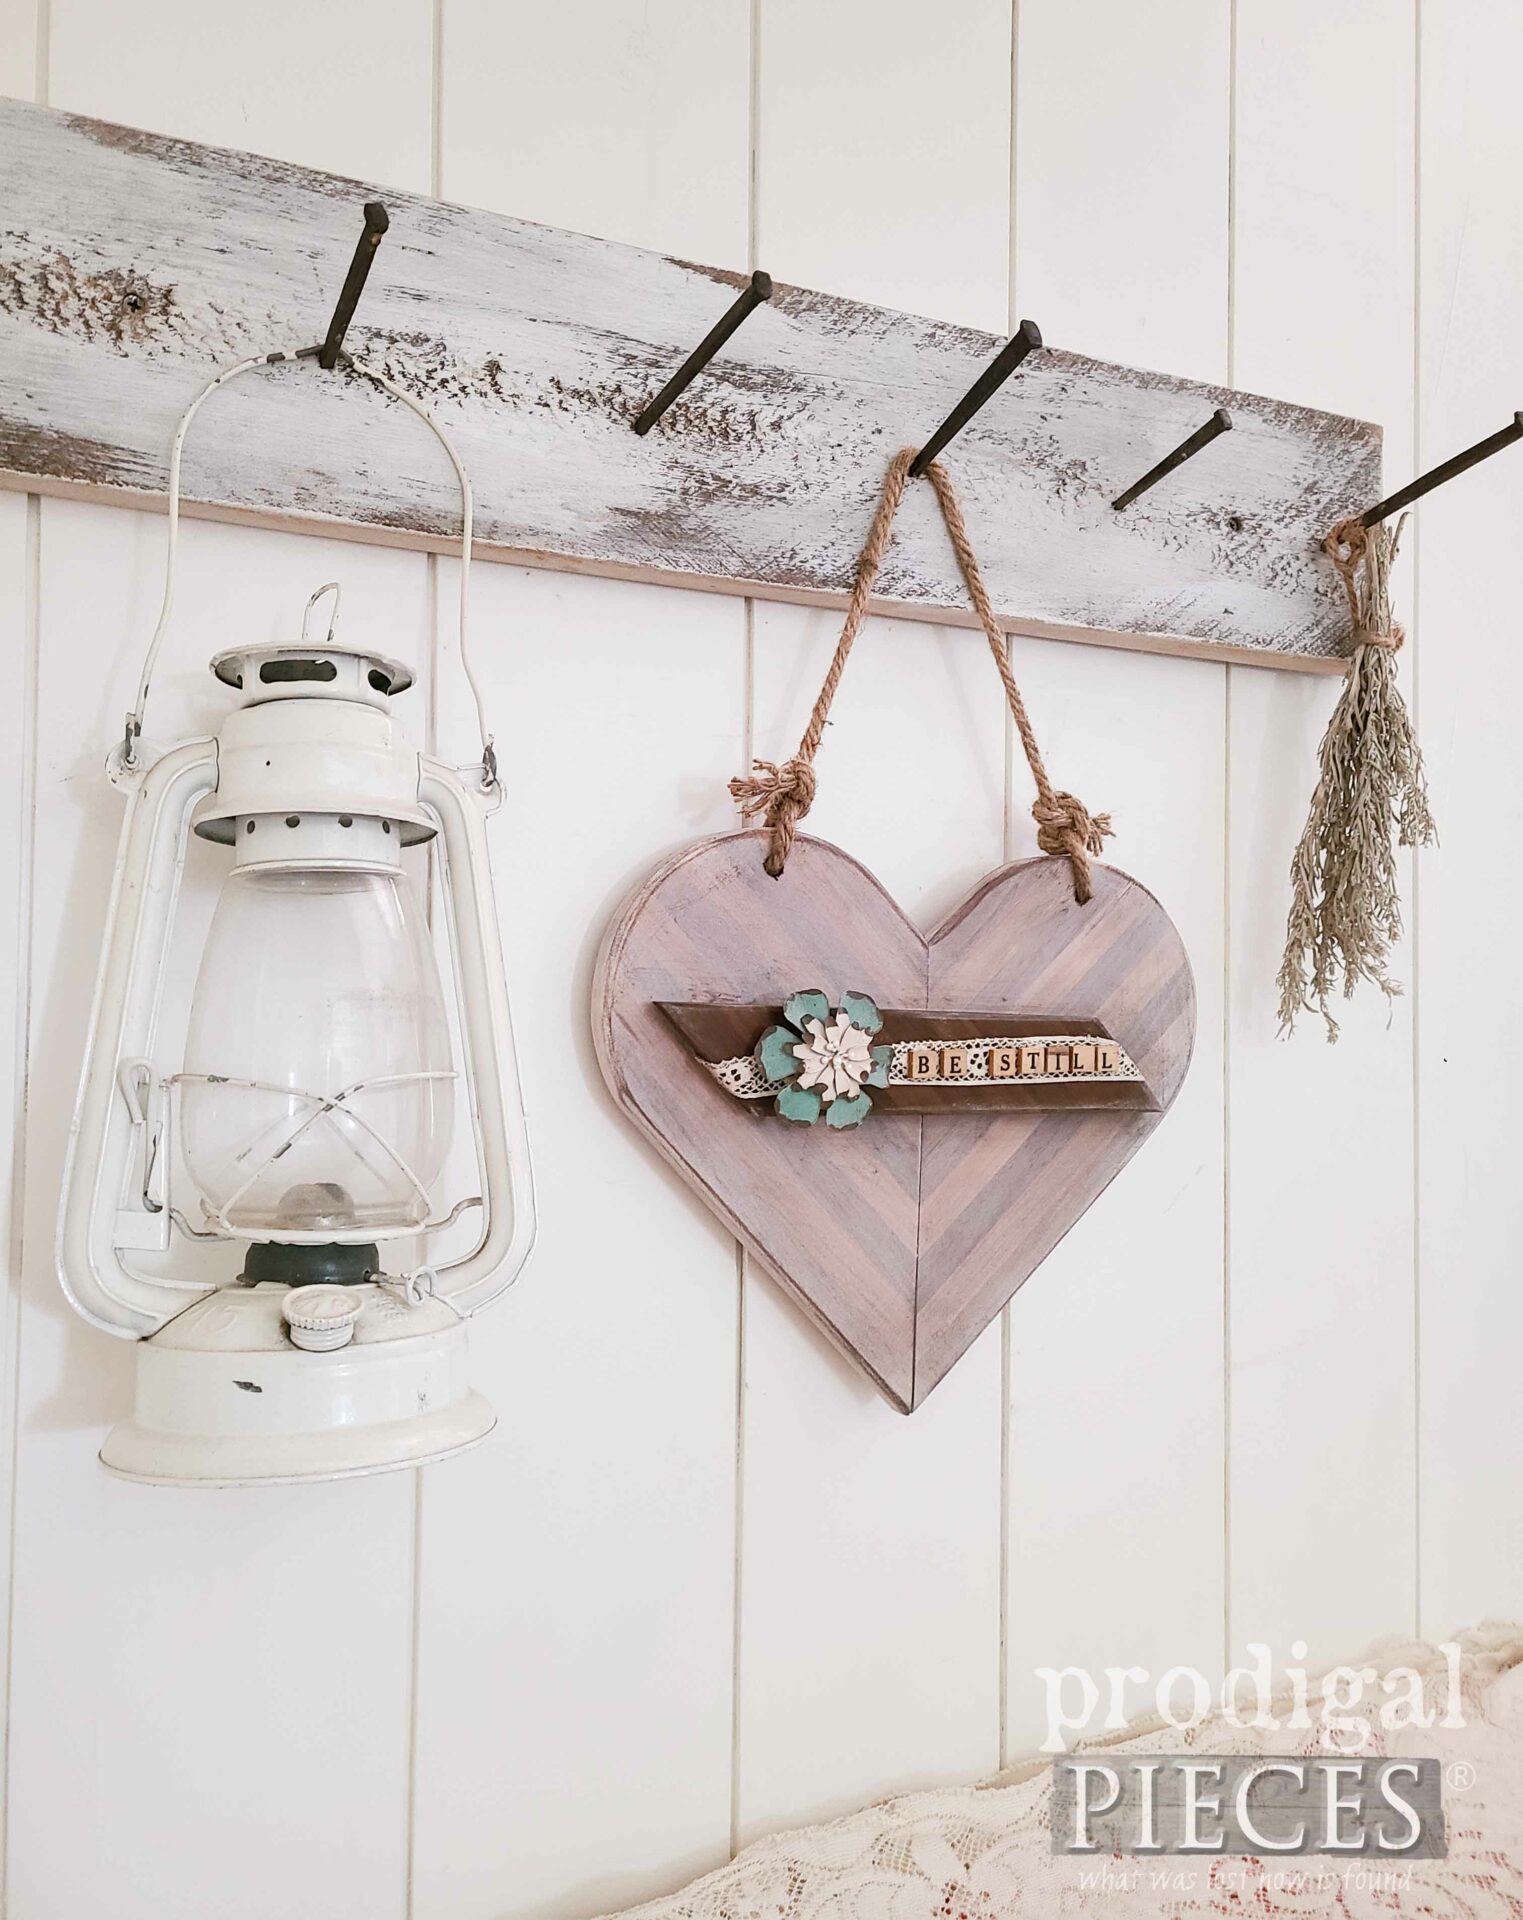 DIY Reclaimed Heart from Upcycled Wooden Trivet by Larissa of Prodigal Pieces | prodigalpieces.com #prodigalpieces #upcycled #homedecor